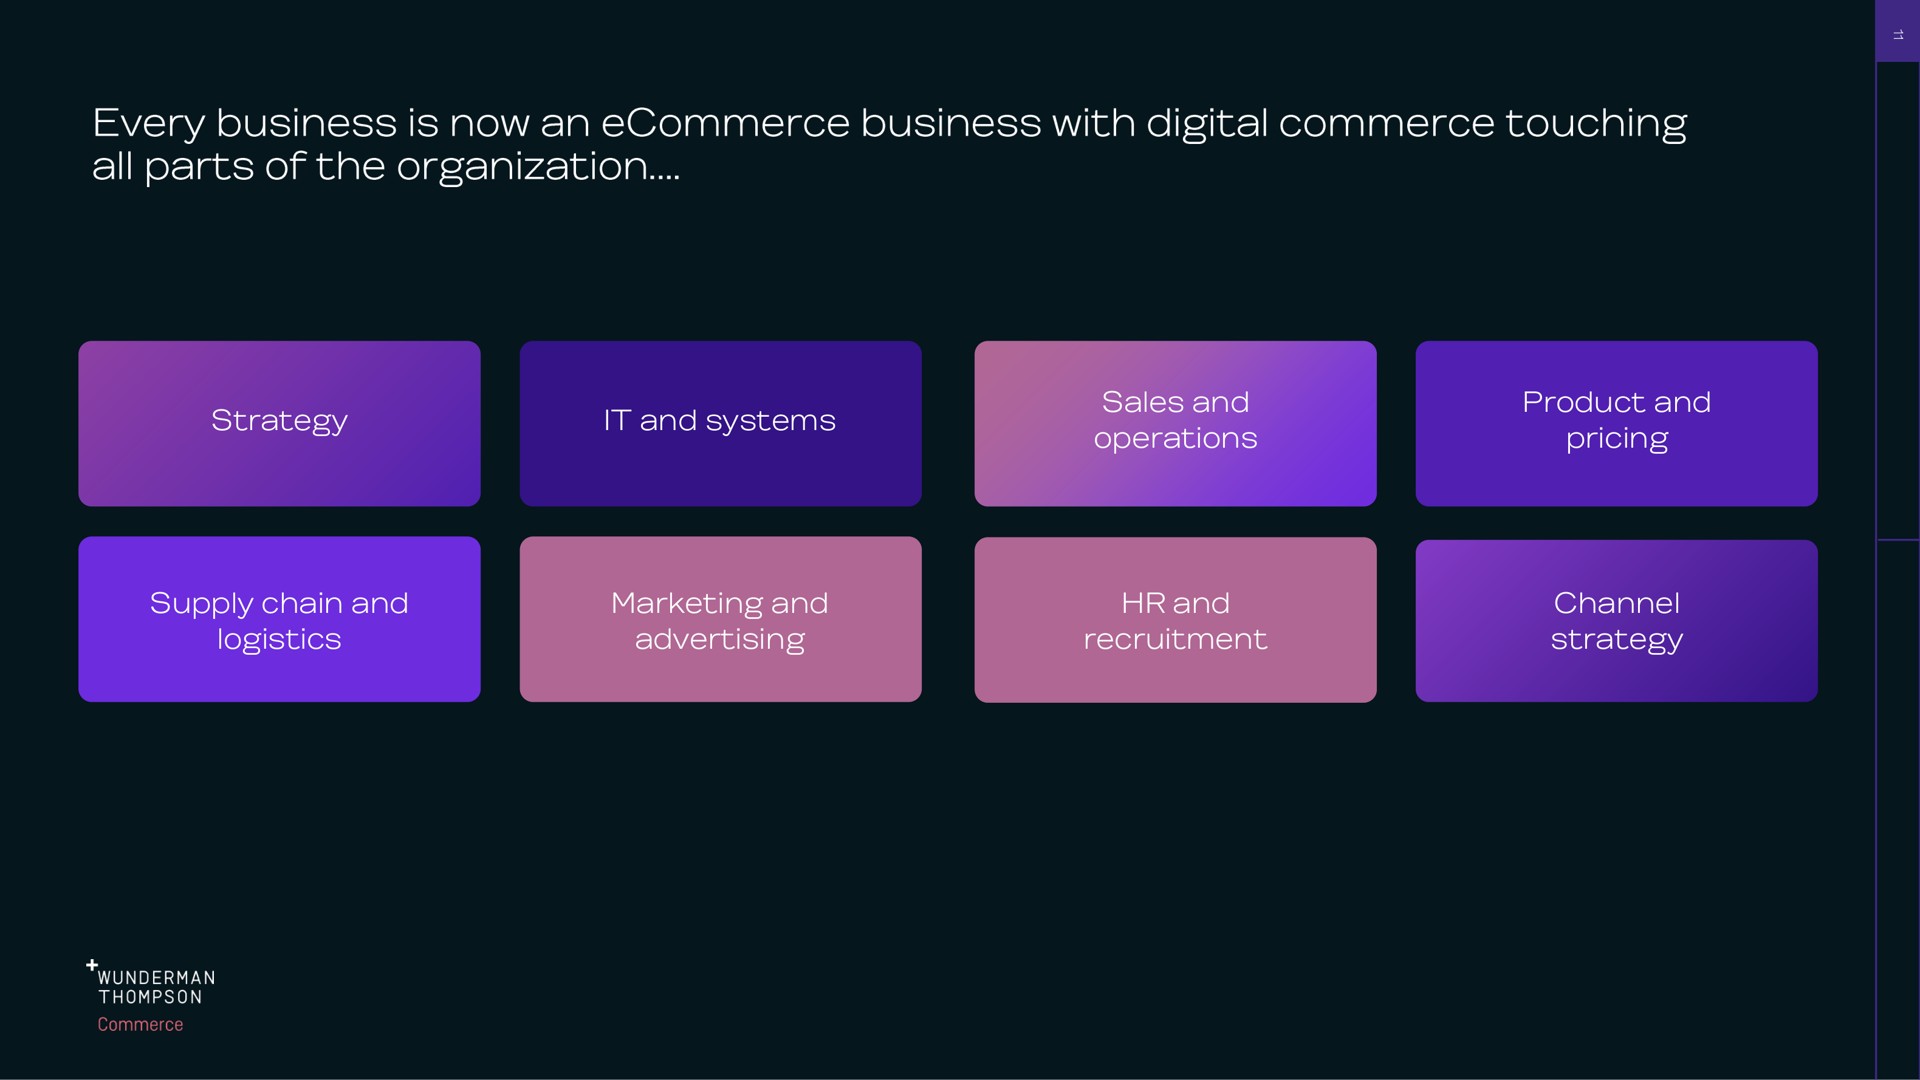 strategy it and systems sales and operations product and pricing supply chain and logistics marketing and advertising and recruitment channel strategy every business is now an business with digital commerce touching all parts of the organization | WPP